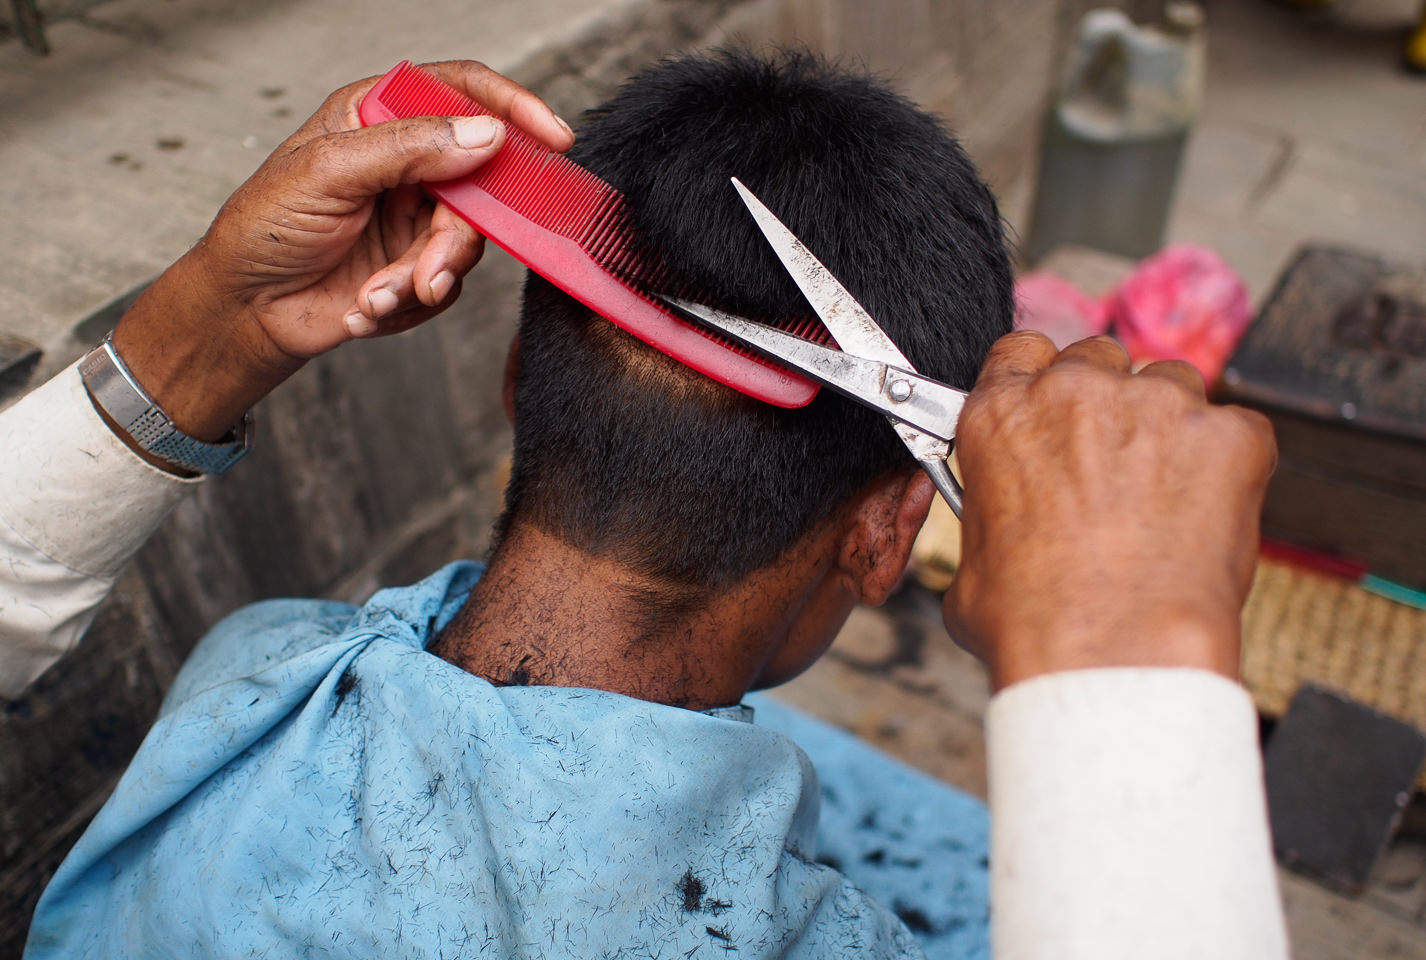 A street barber giving a haircut to one of the locals.